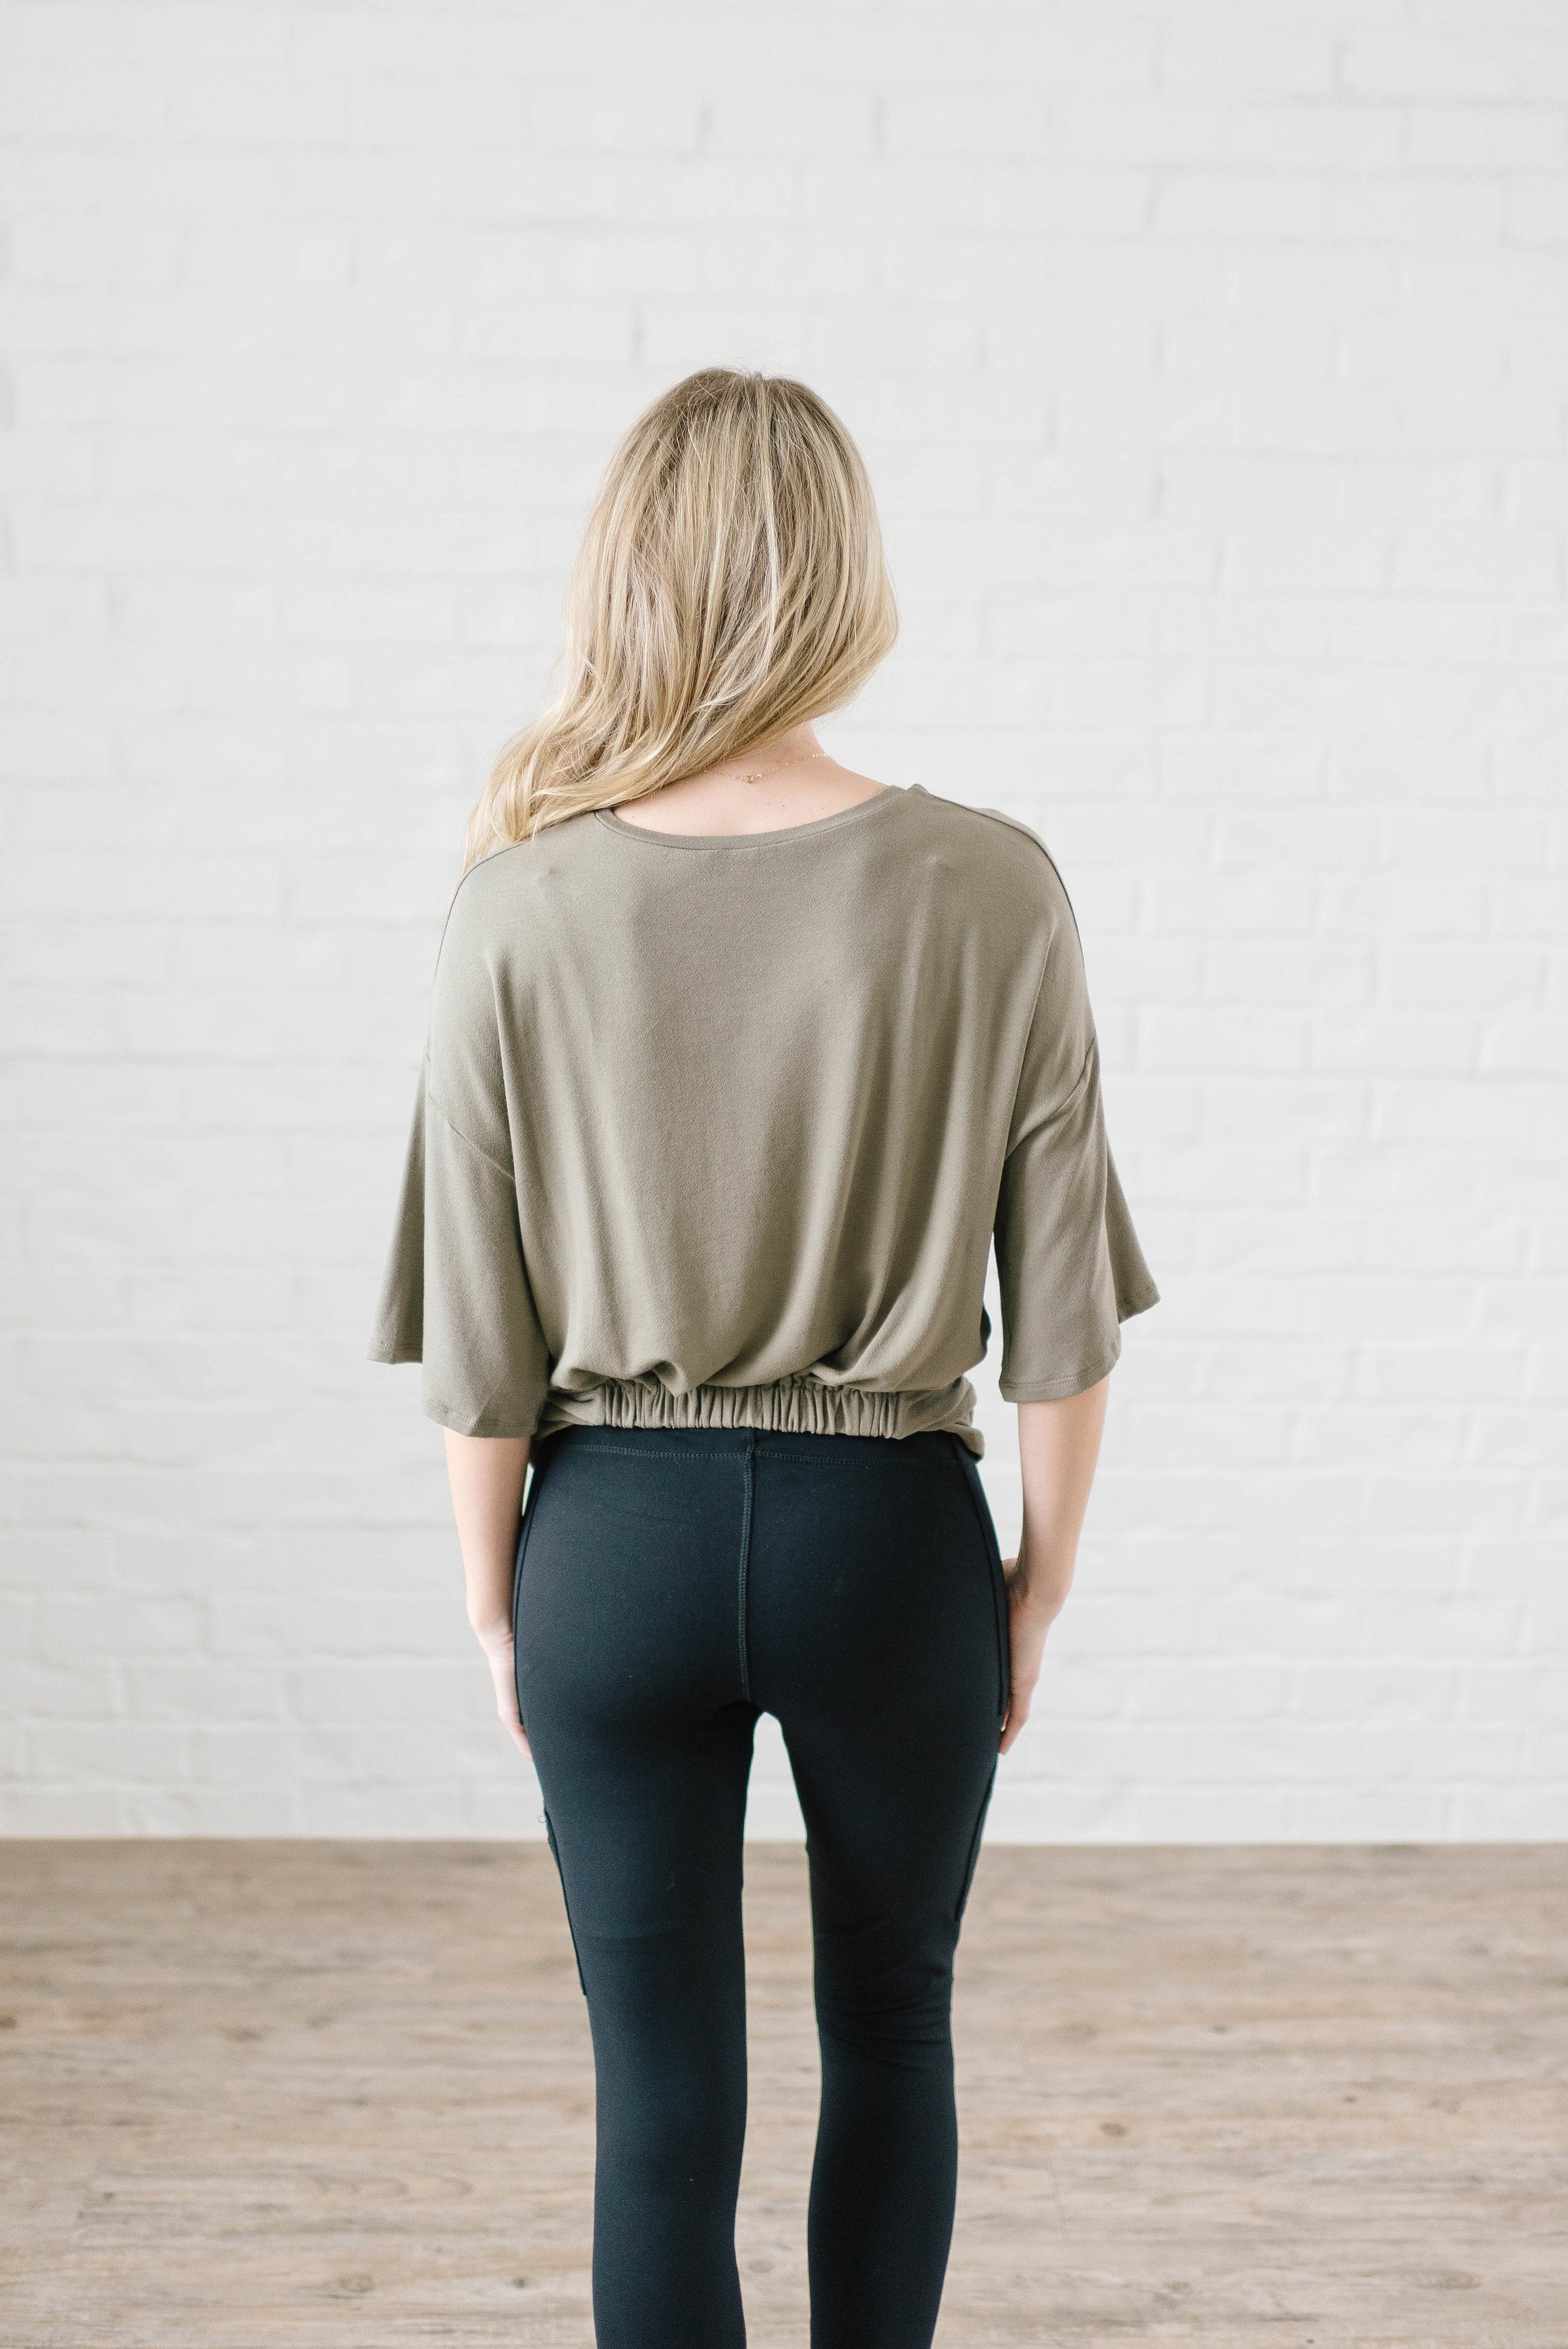 Feeling Knotty Tee in Olive